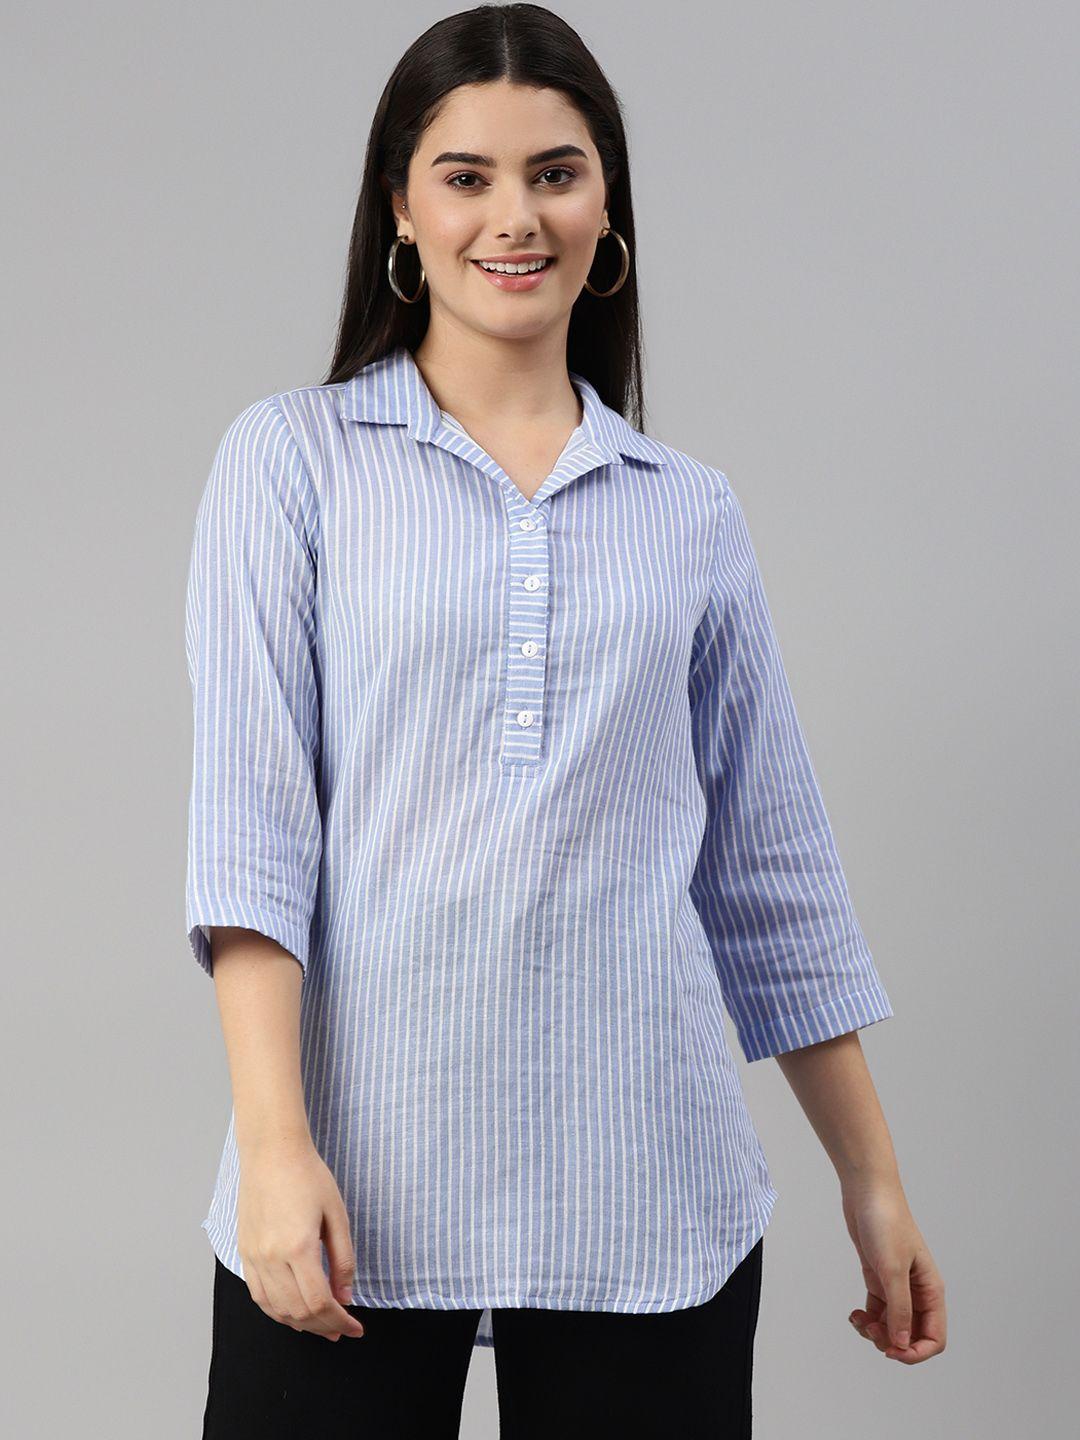 ayaany blue & white striped shirt style top